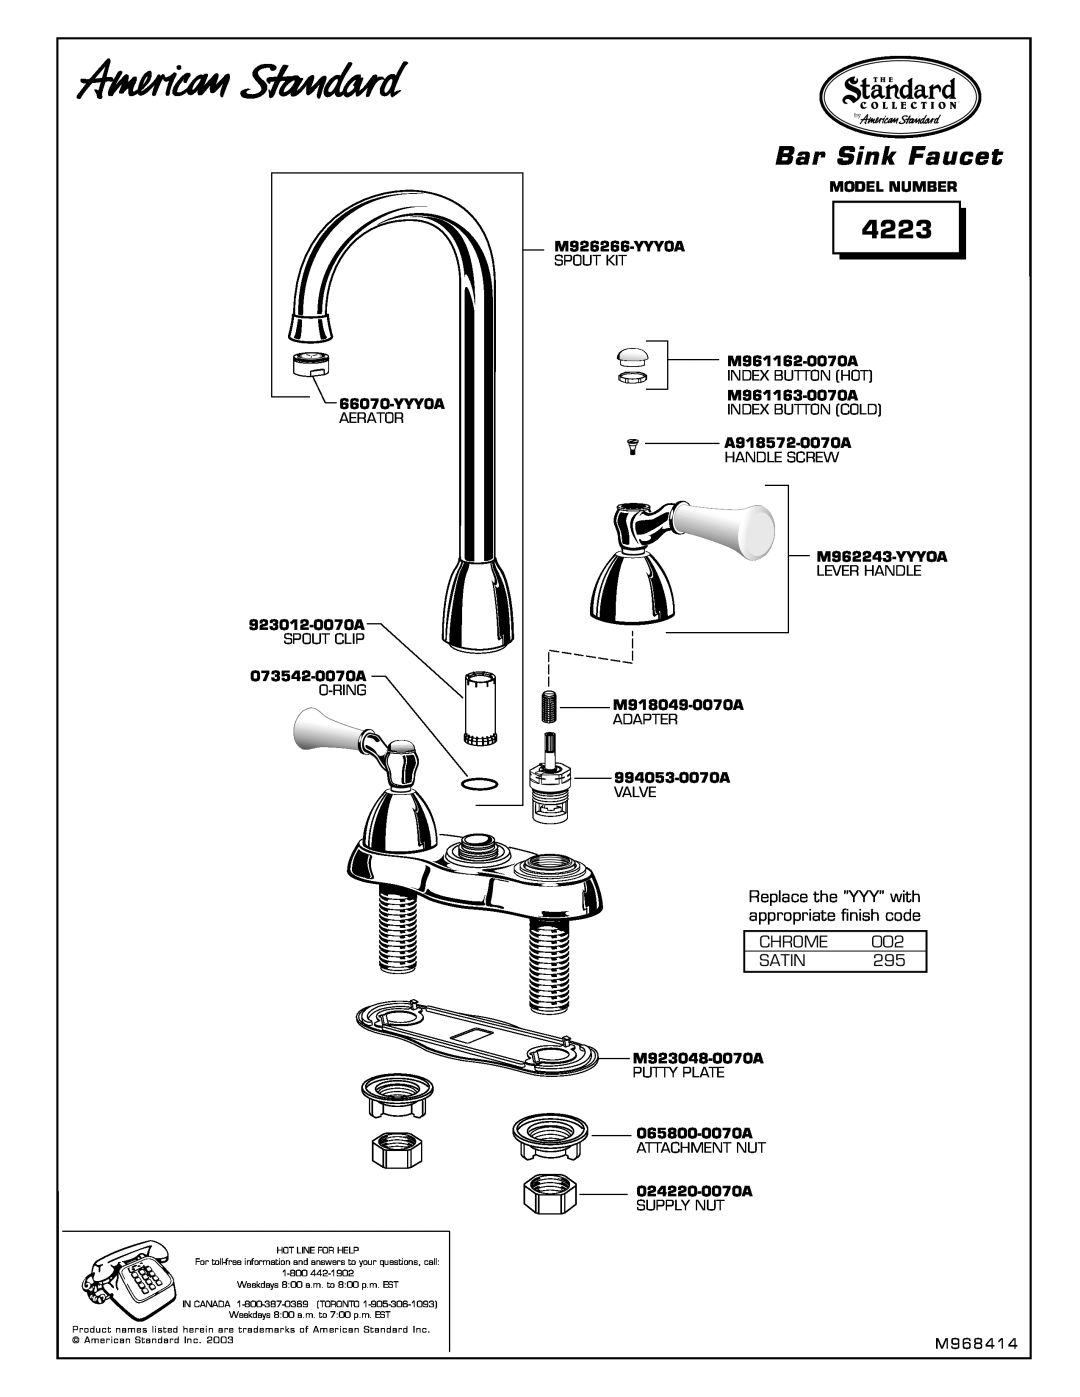 American Standard 4223 installation instructions Bar Sink Faucet, Replace the YYY with appropriate finish code CHROME SATIN 